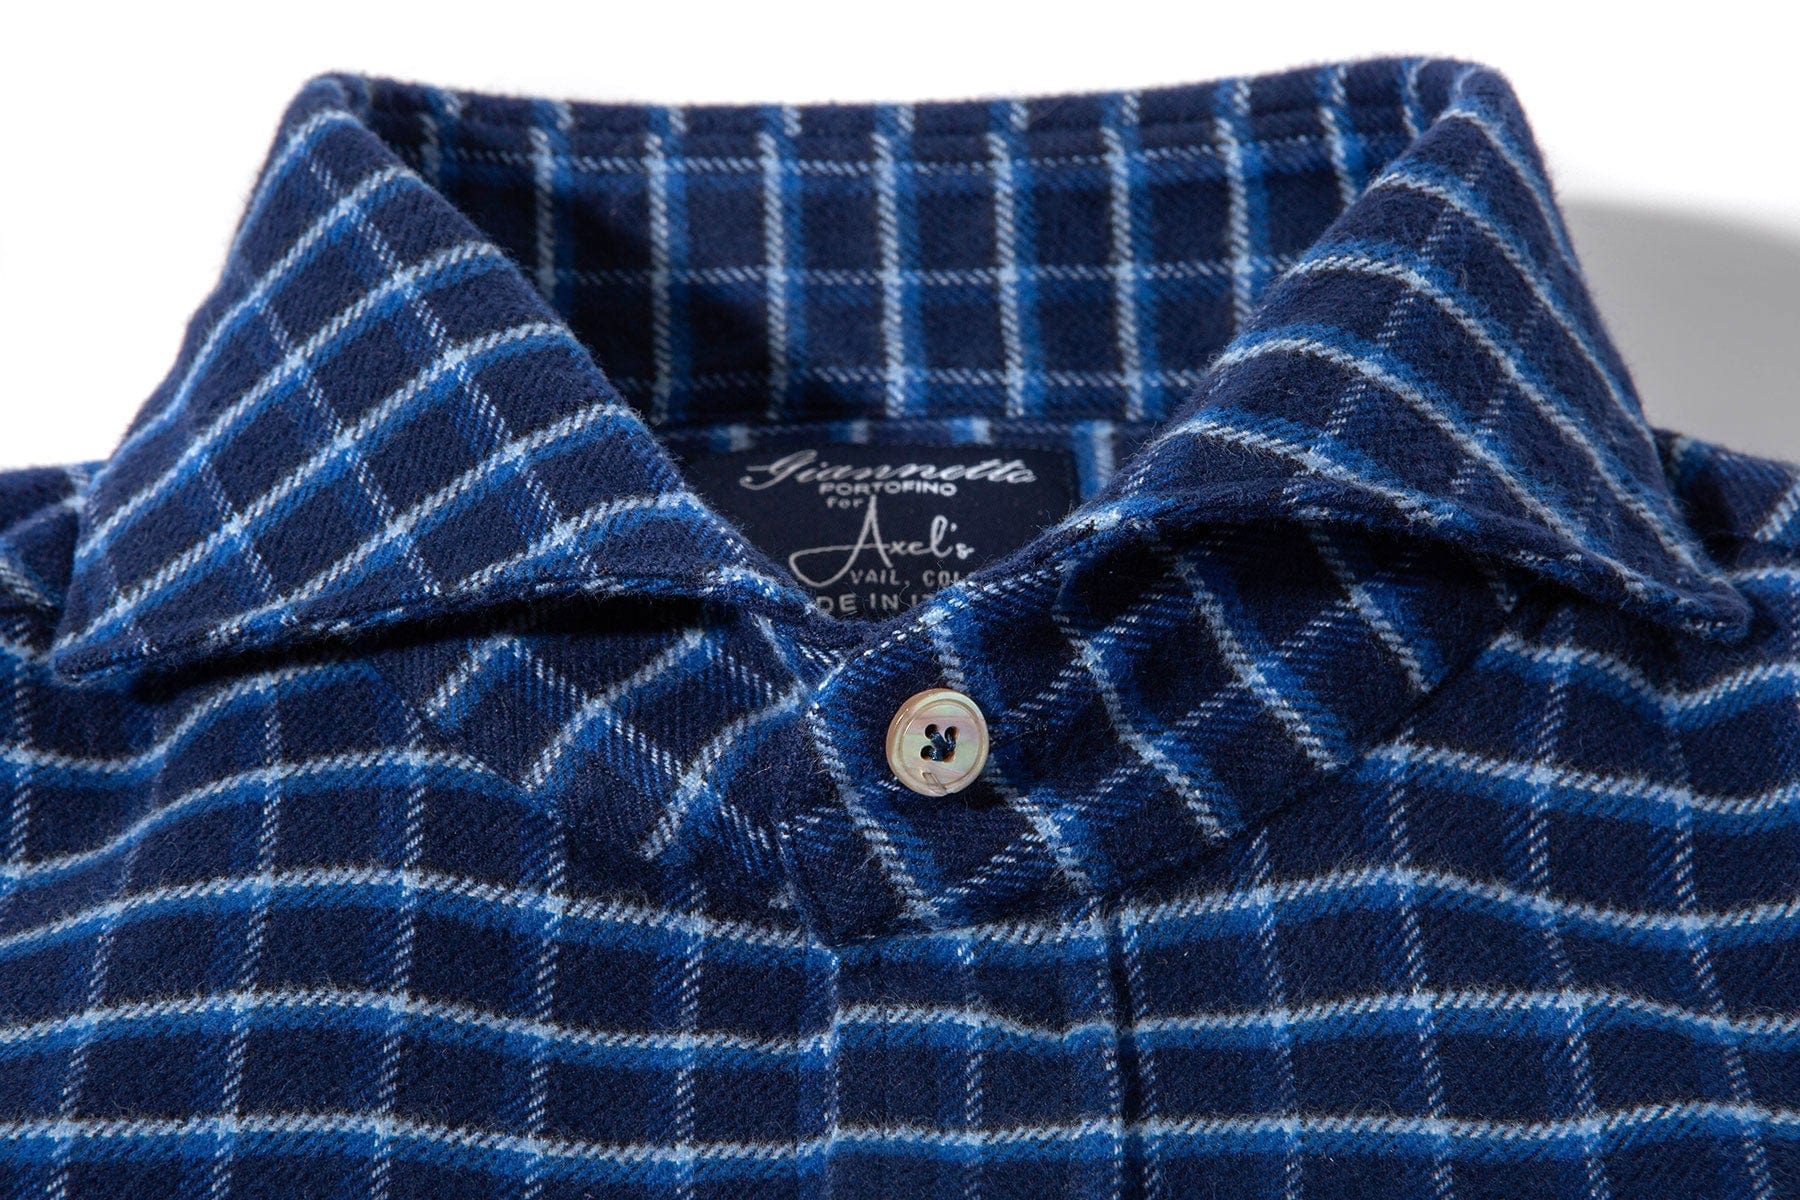 Alvord Cotton Flannel in Navy and White - AXEL'S